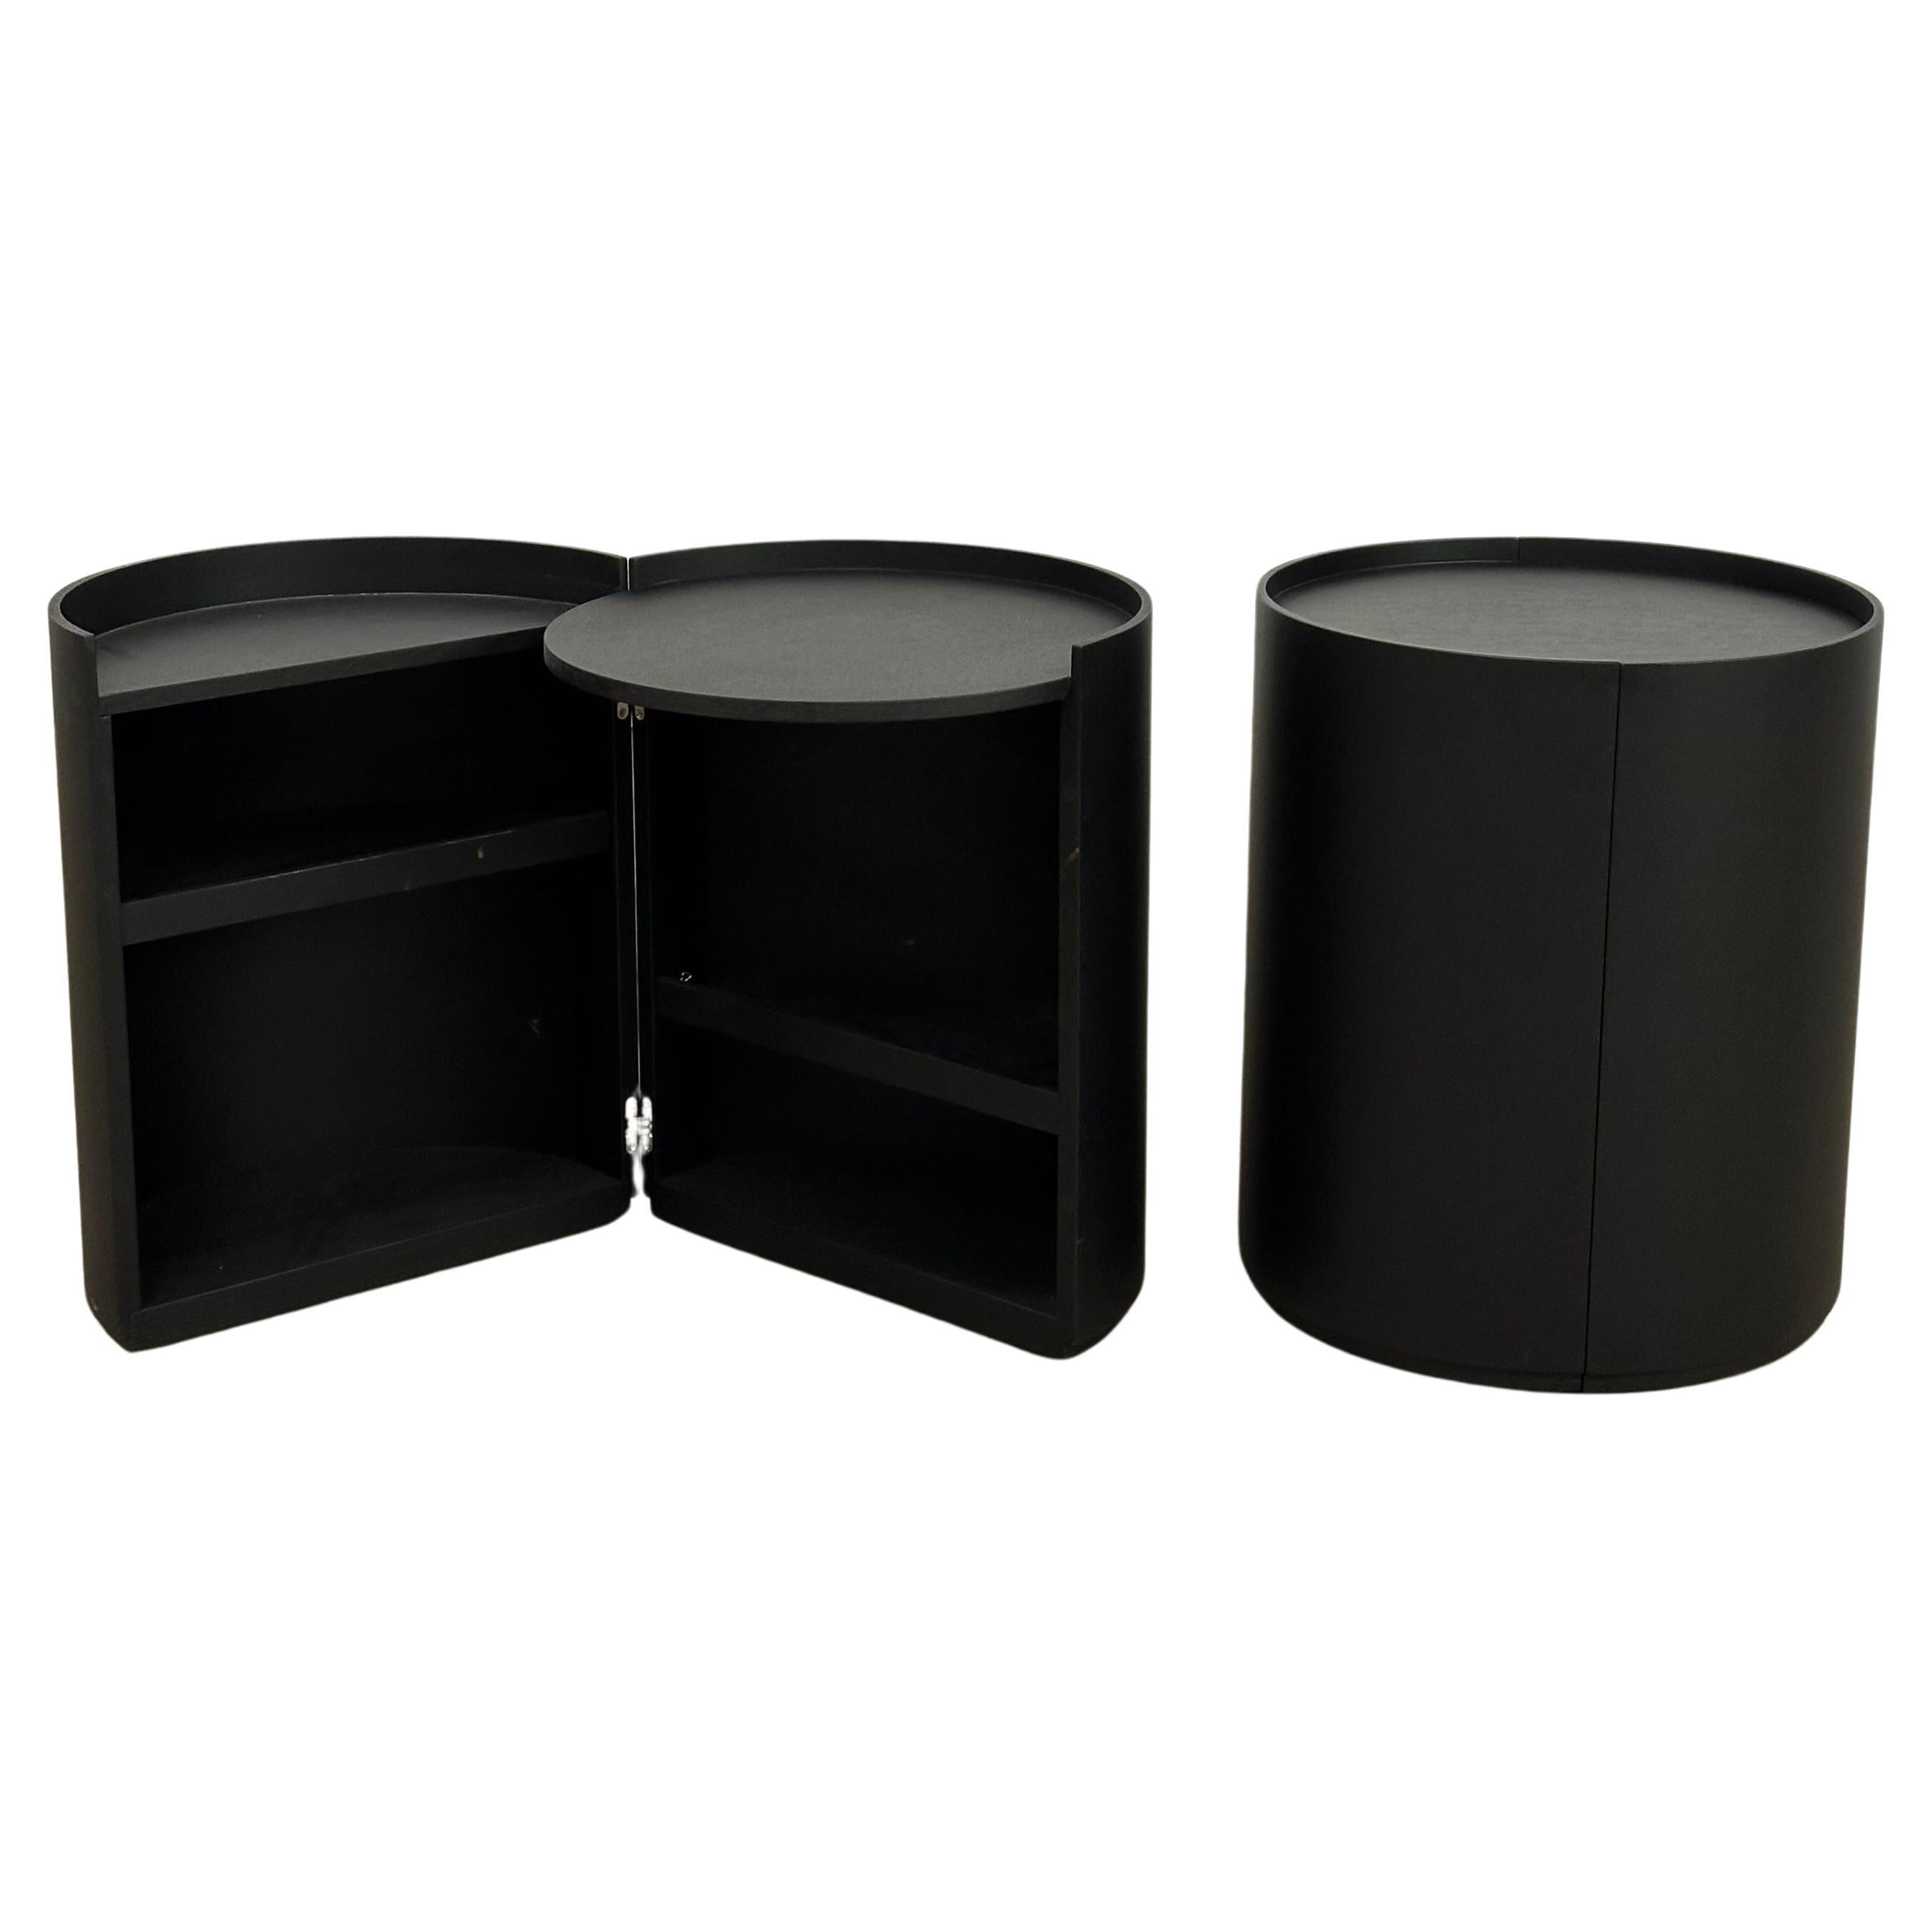 Pair of Moon Bedside Tables by Mist-O for Living Divani, Italy, 2014 For Sale